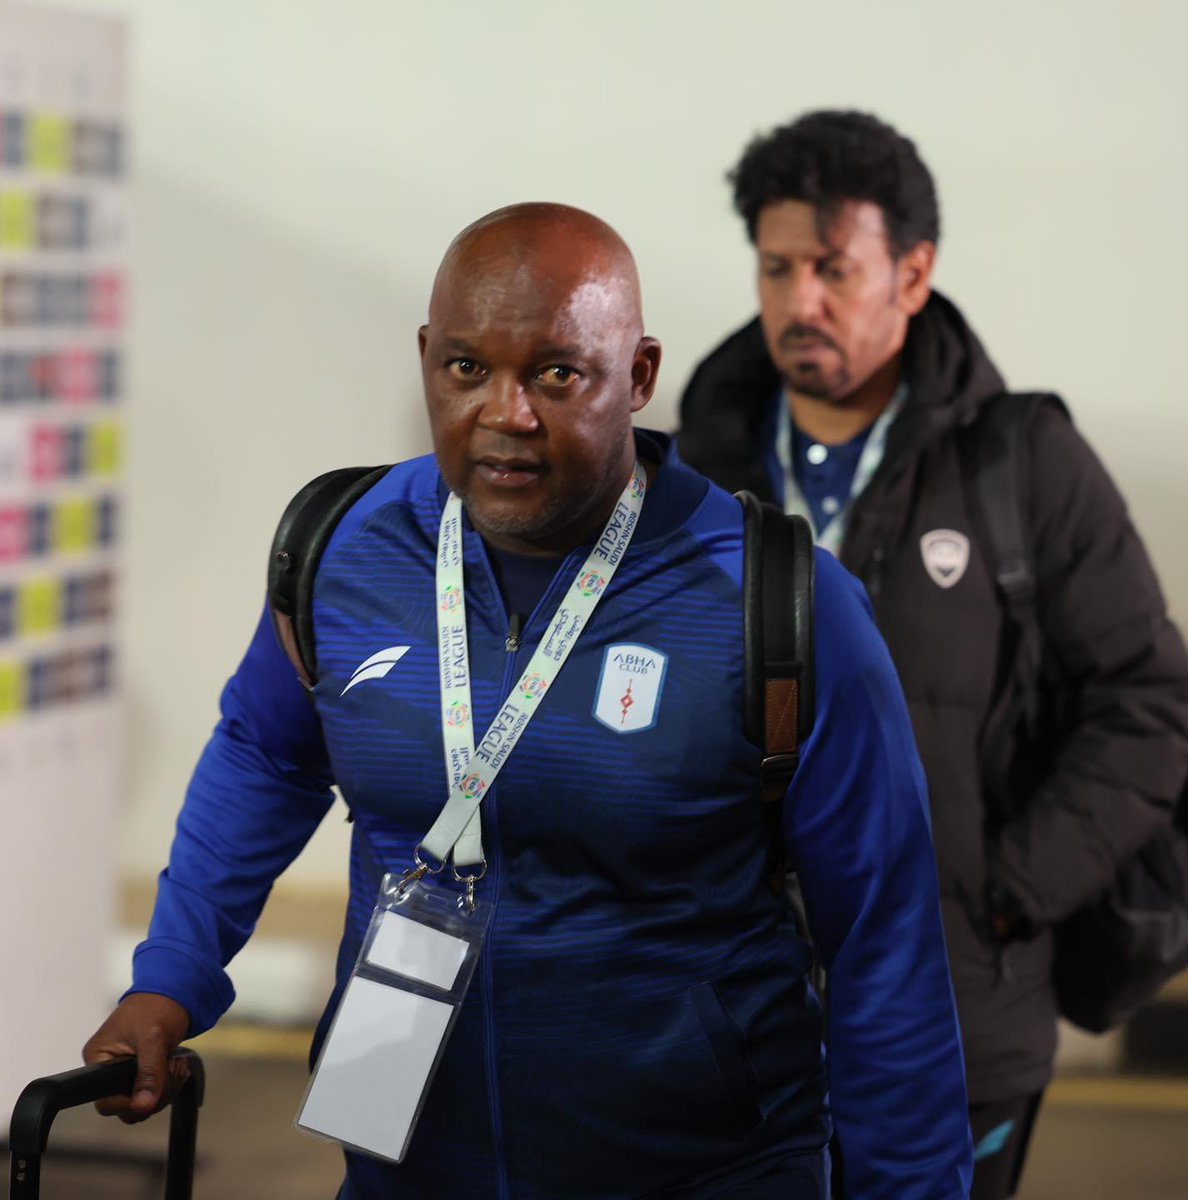 𝐇𝐈𝐒𝐓𝐎𝐑𝐈𝐂 𝐖𝐈𝐍 𝐅𝐎𝐑 𝐏𝐈𝐓𝐒𝐎! 🇿🇦✨ The 2016 CAF coach of the year, Pitso Mosimane just beat Al Ittihad 3-1 at home in the Saudi Pro League. Goals from Grzegorz Krychowiak, Hassan Al Ali and Fabian Noguera helped Abha to secure the important three points. Don’t…